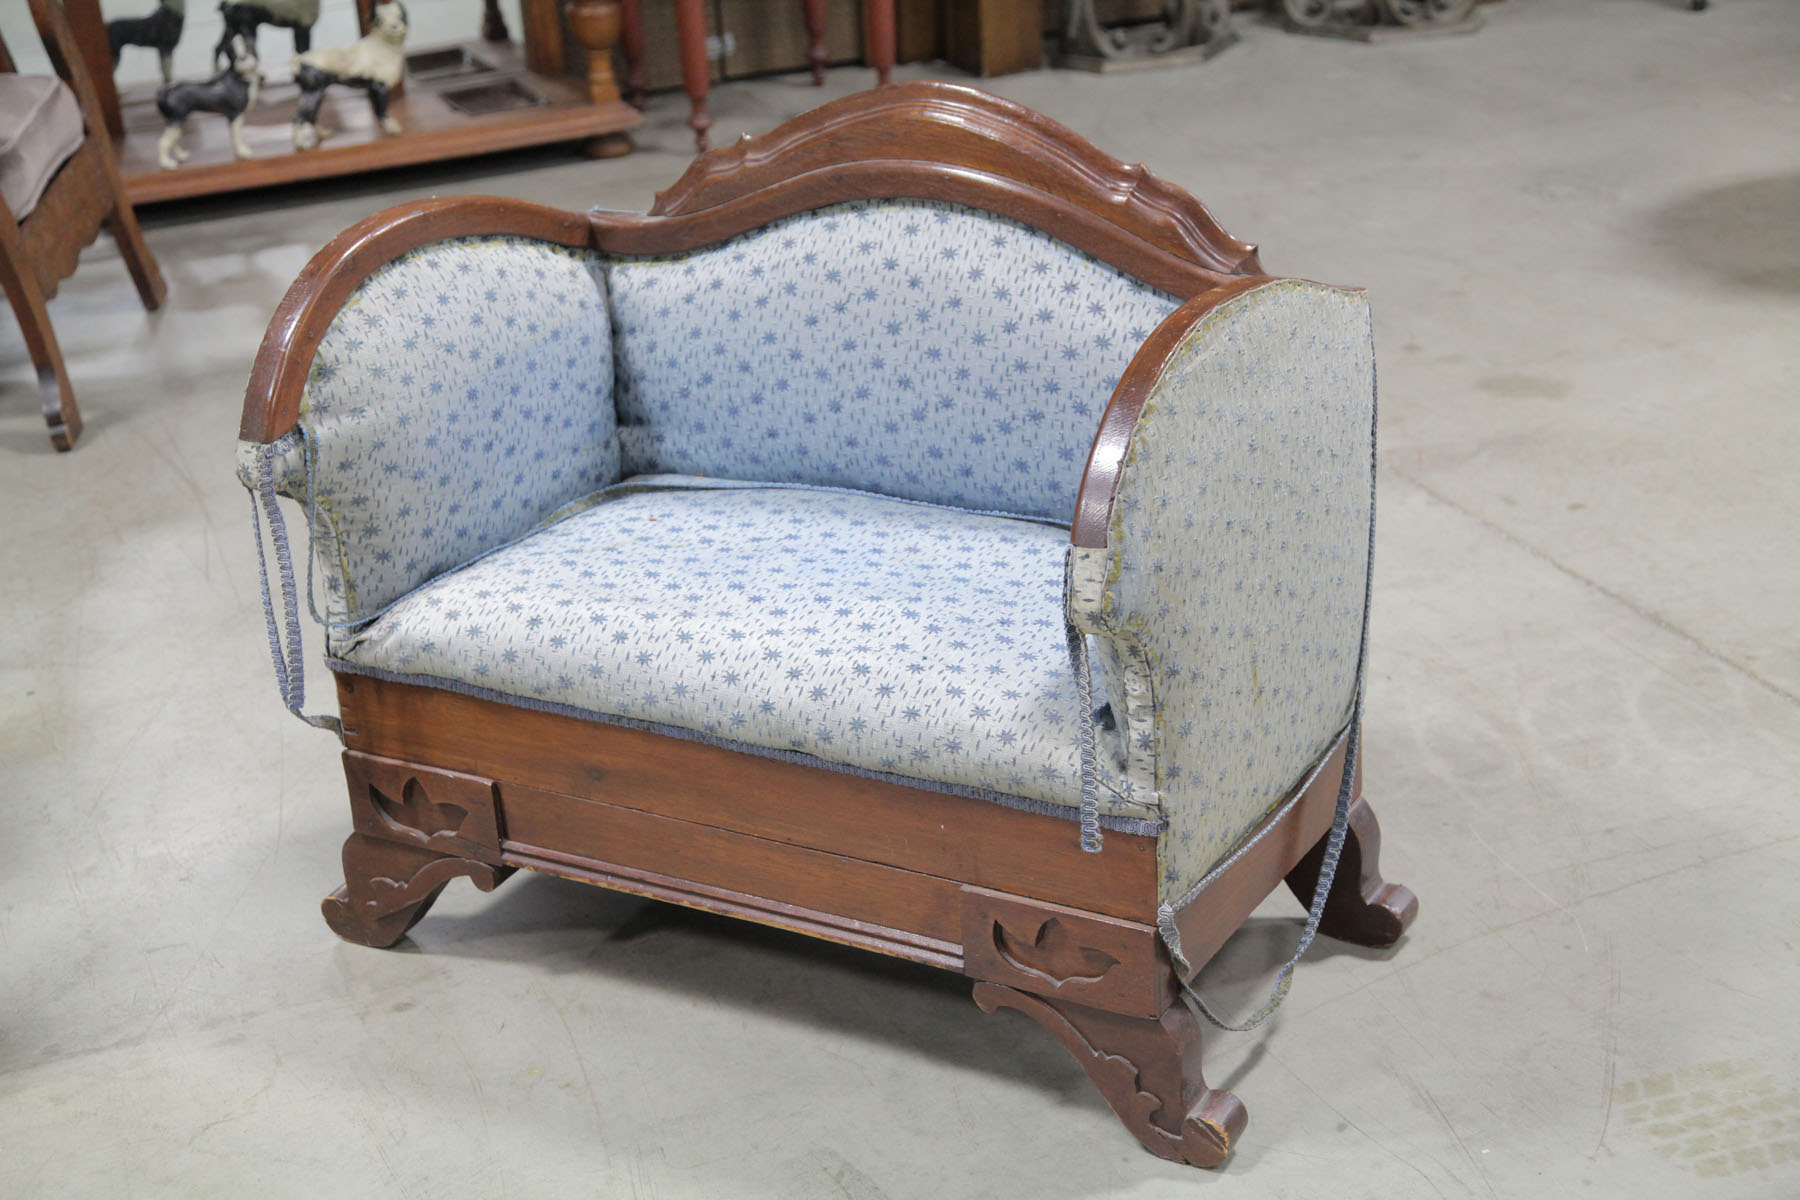 CHILDS SETTEE.  American  early 20th